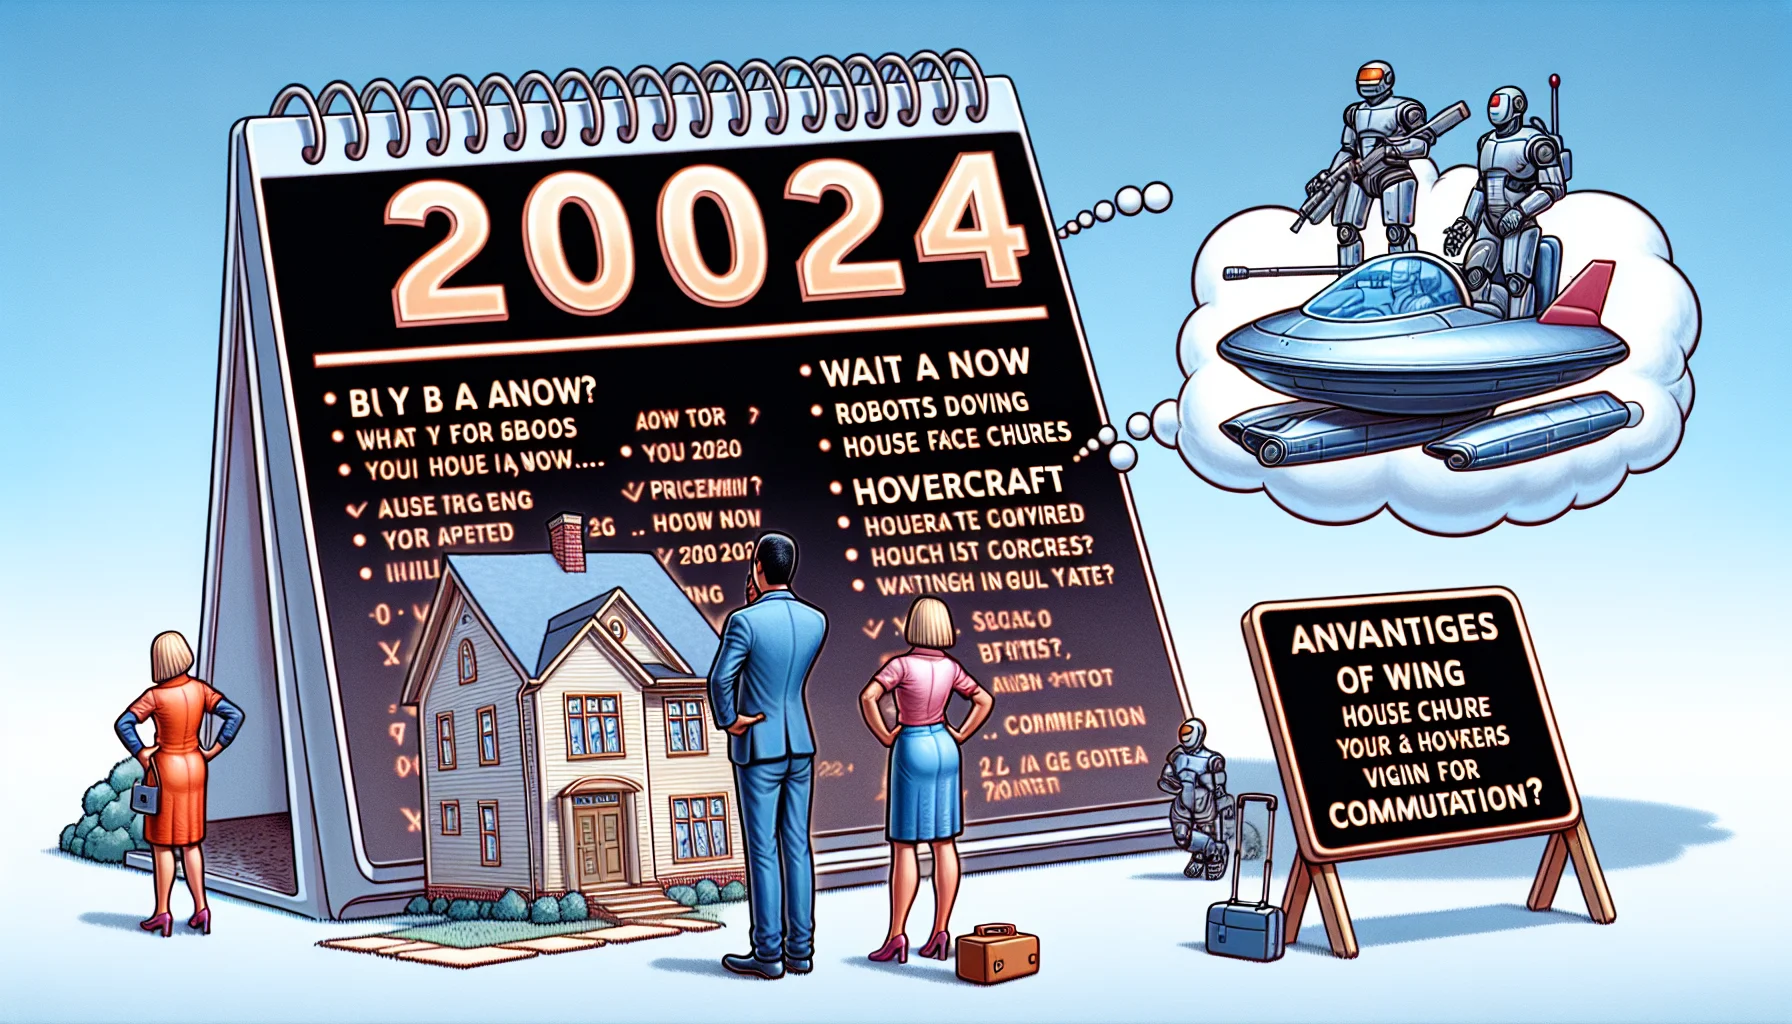 Depict a humorous, realistic situation where a person is contemplating whether to buy a house now or wait until 2024. Show a gigantic calendar with '2024' marked prominently. To one side, show a house with a price tag, signifying the real estate market. On the other side, indicate a potential futuristic scenario that might occur in 2024 such as robots doing house chores, hovercraft for commutation, indicating advantages of waiting. Ensure all elements are presented in a cartoonish, lighthearted style to maintain the humorous tone.